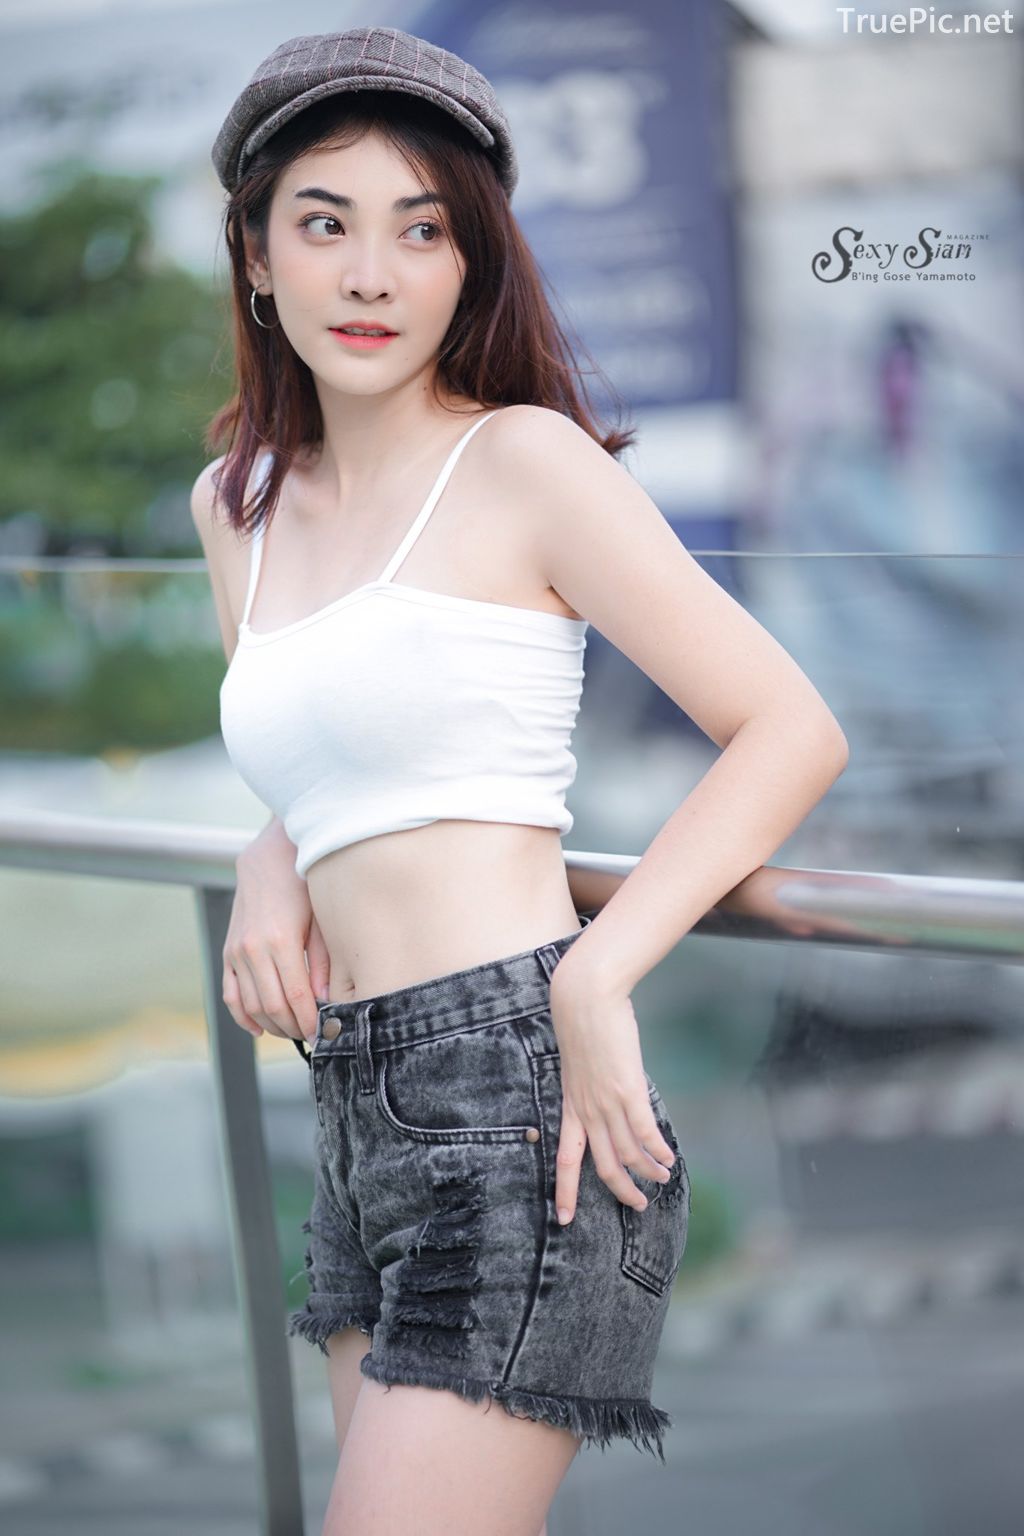 Thailand beautifil girl - Wannapon Thongkayai - The Angel on the City Street - TruePic.net - Picture 16